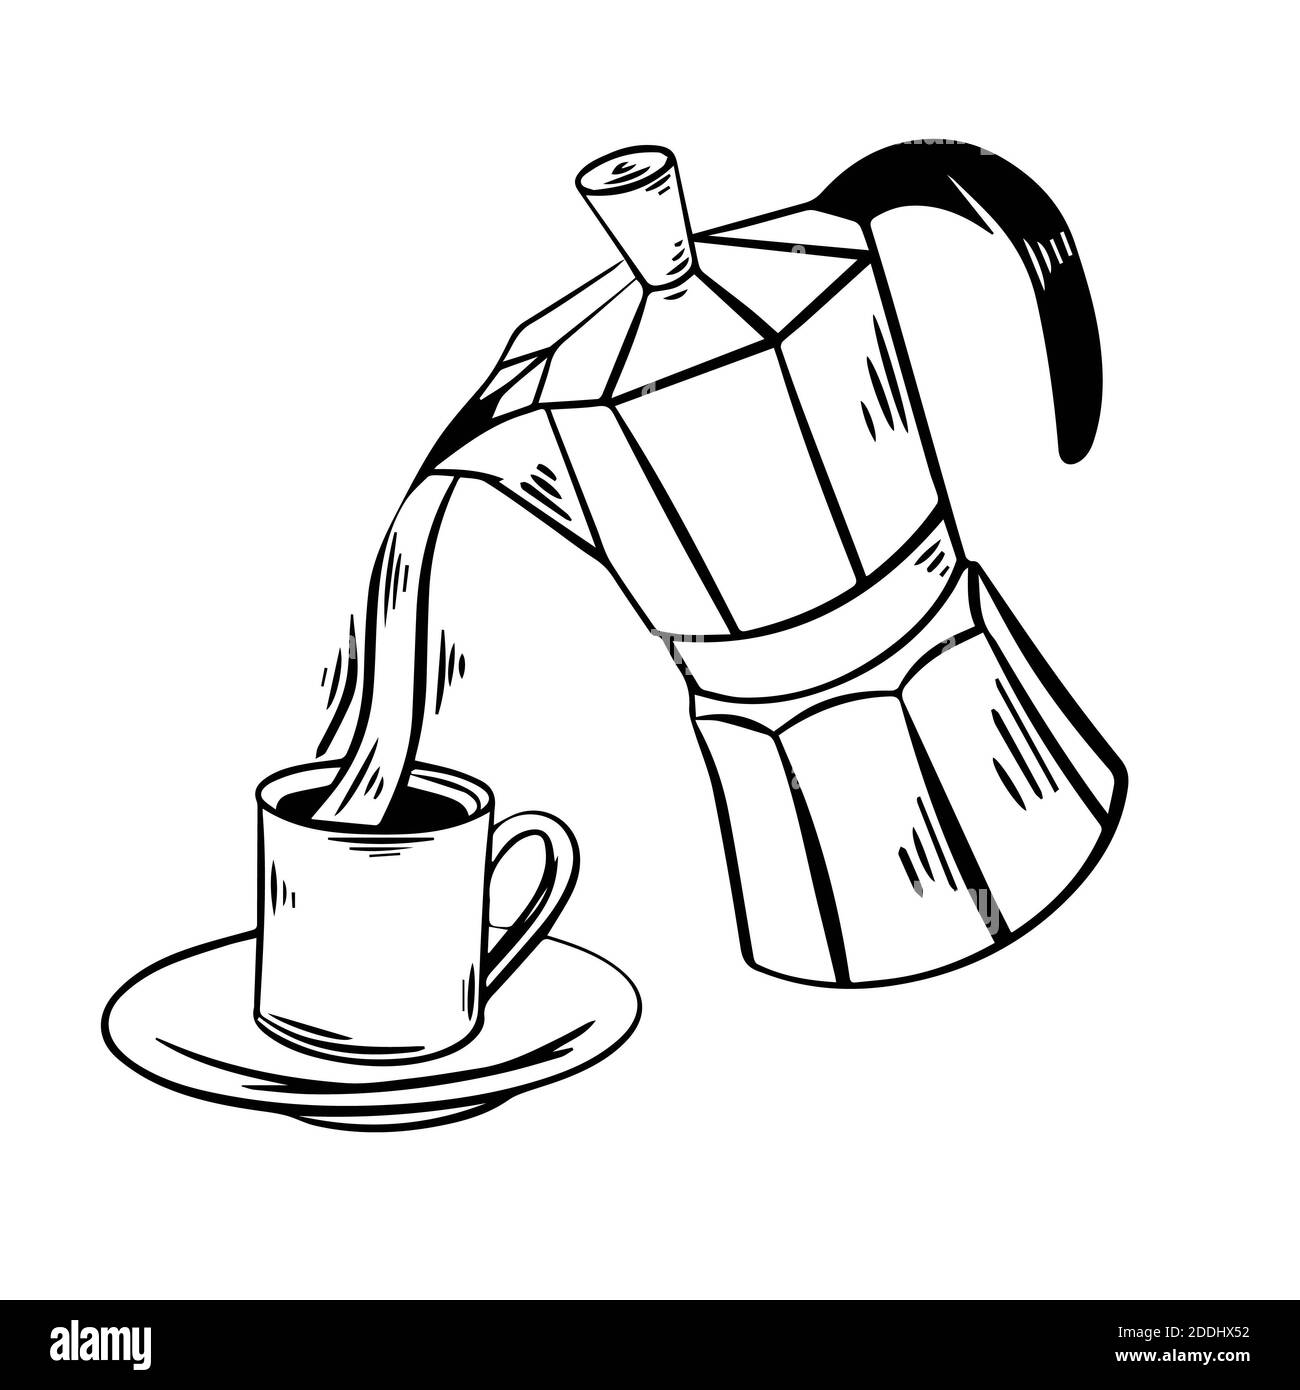 Coffee poured from a flying moka into a cup hand drawn vector illustration. Sketch moka with cup of coffee on white background. Food, cafe, coffee ill Stock Photo